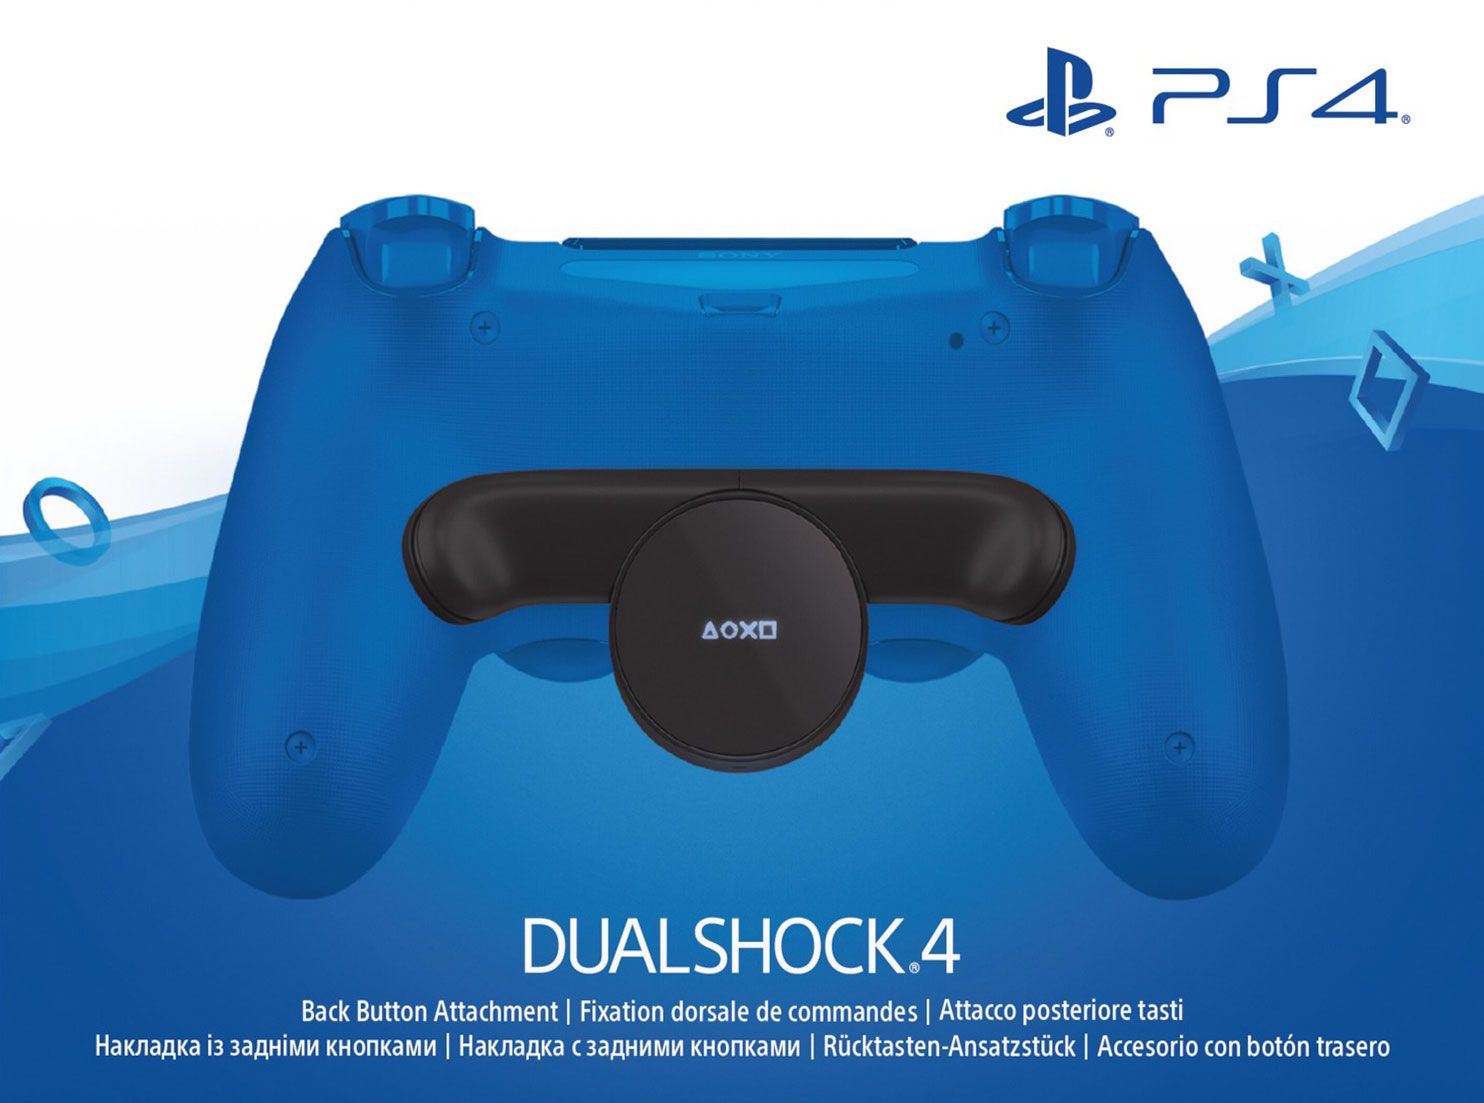 playstation 4 back button attachment for dualshock 4 wireless controller